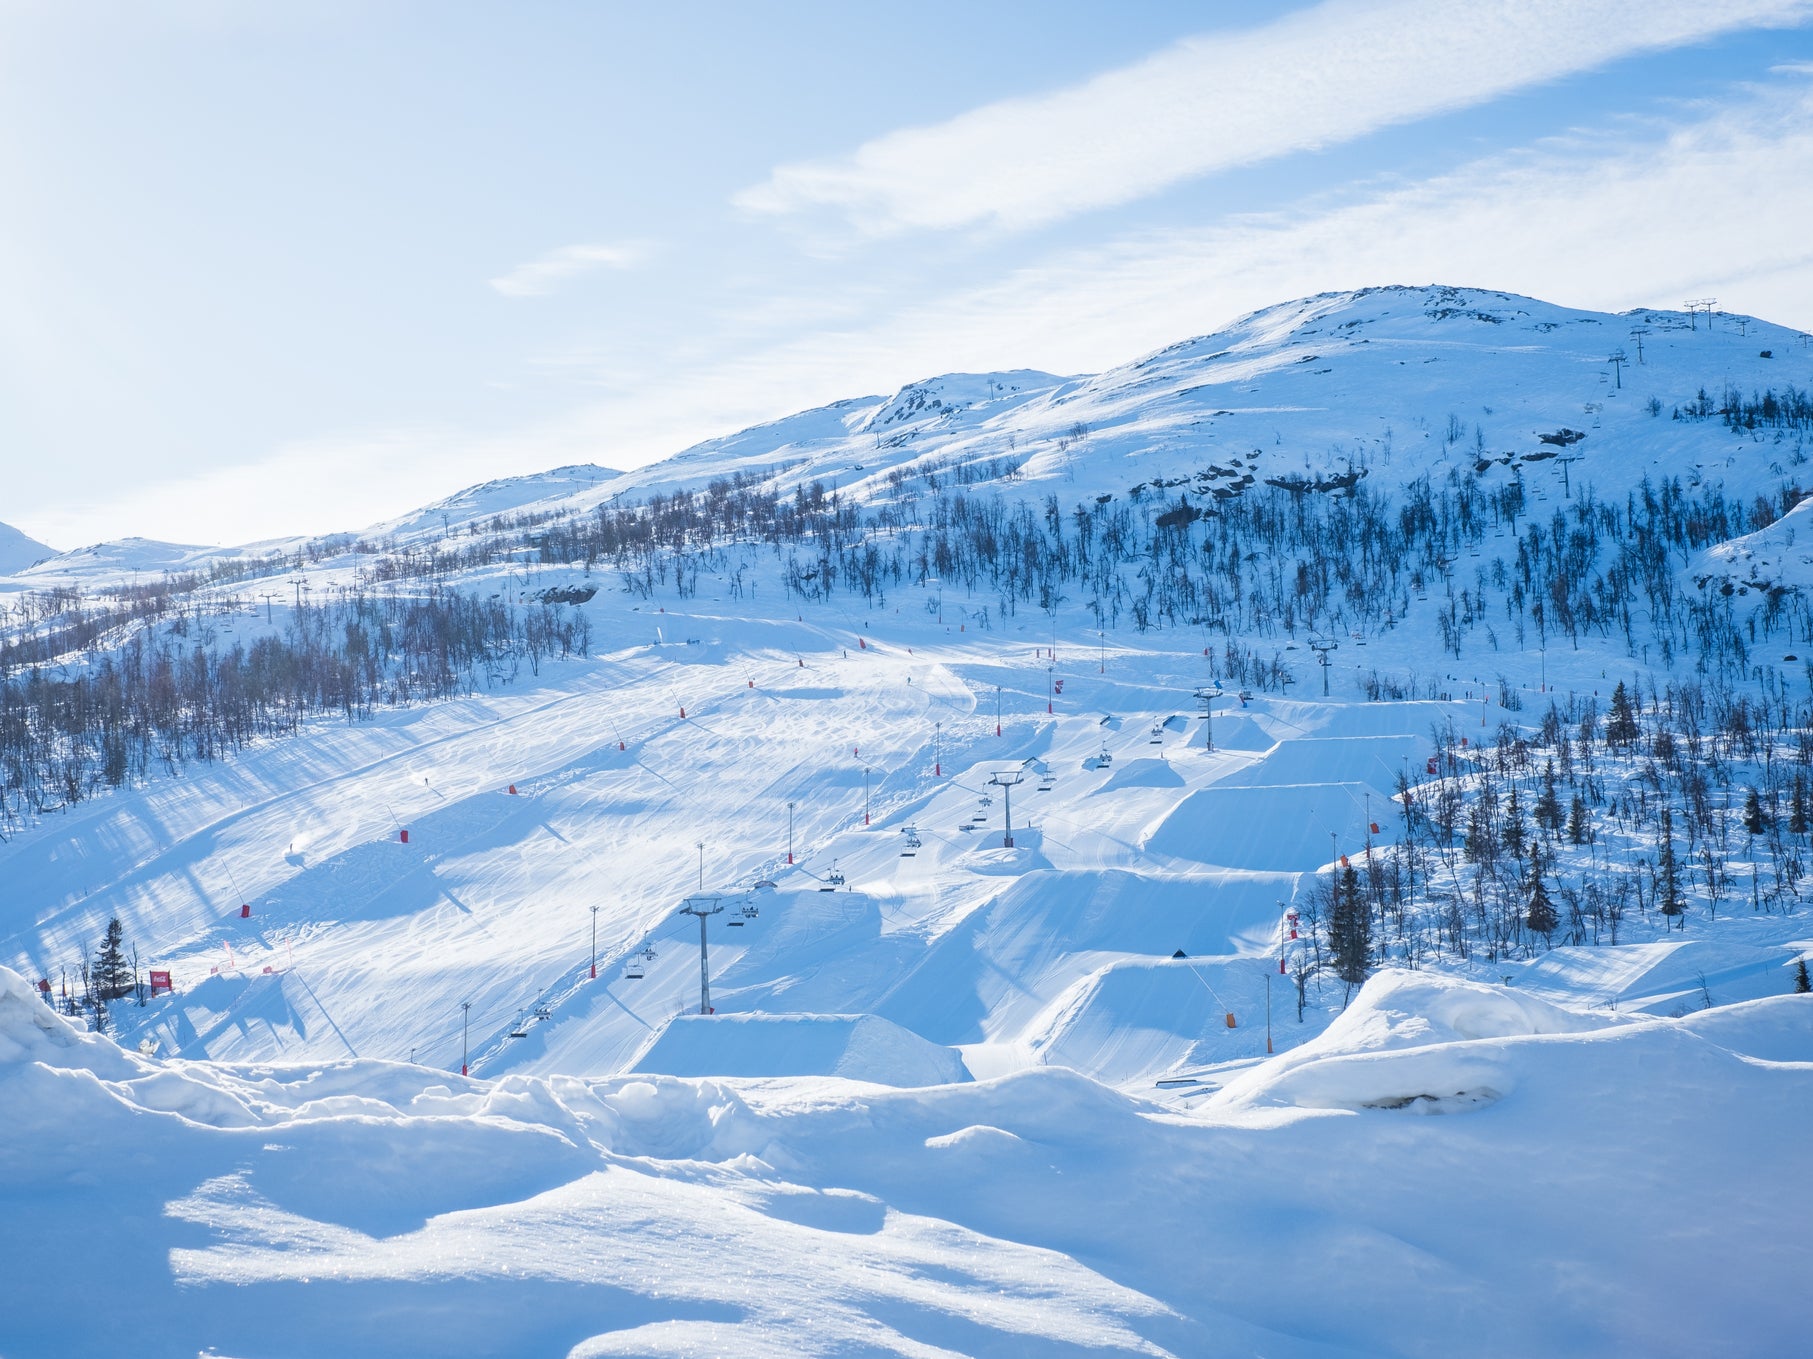 The South Norway ski resort is open right through to May